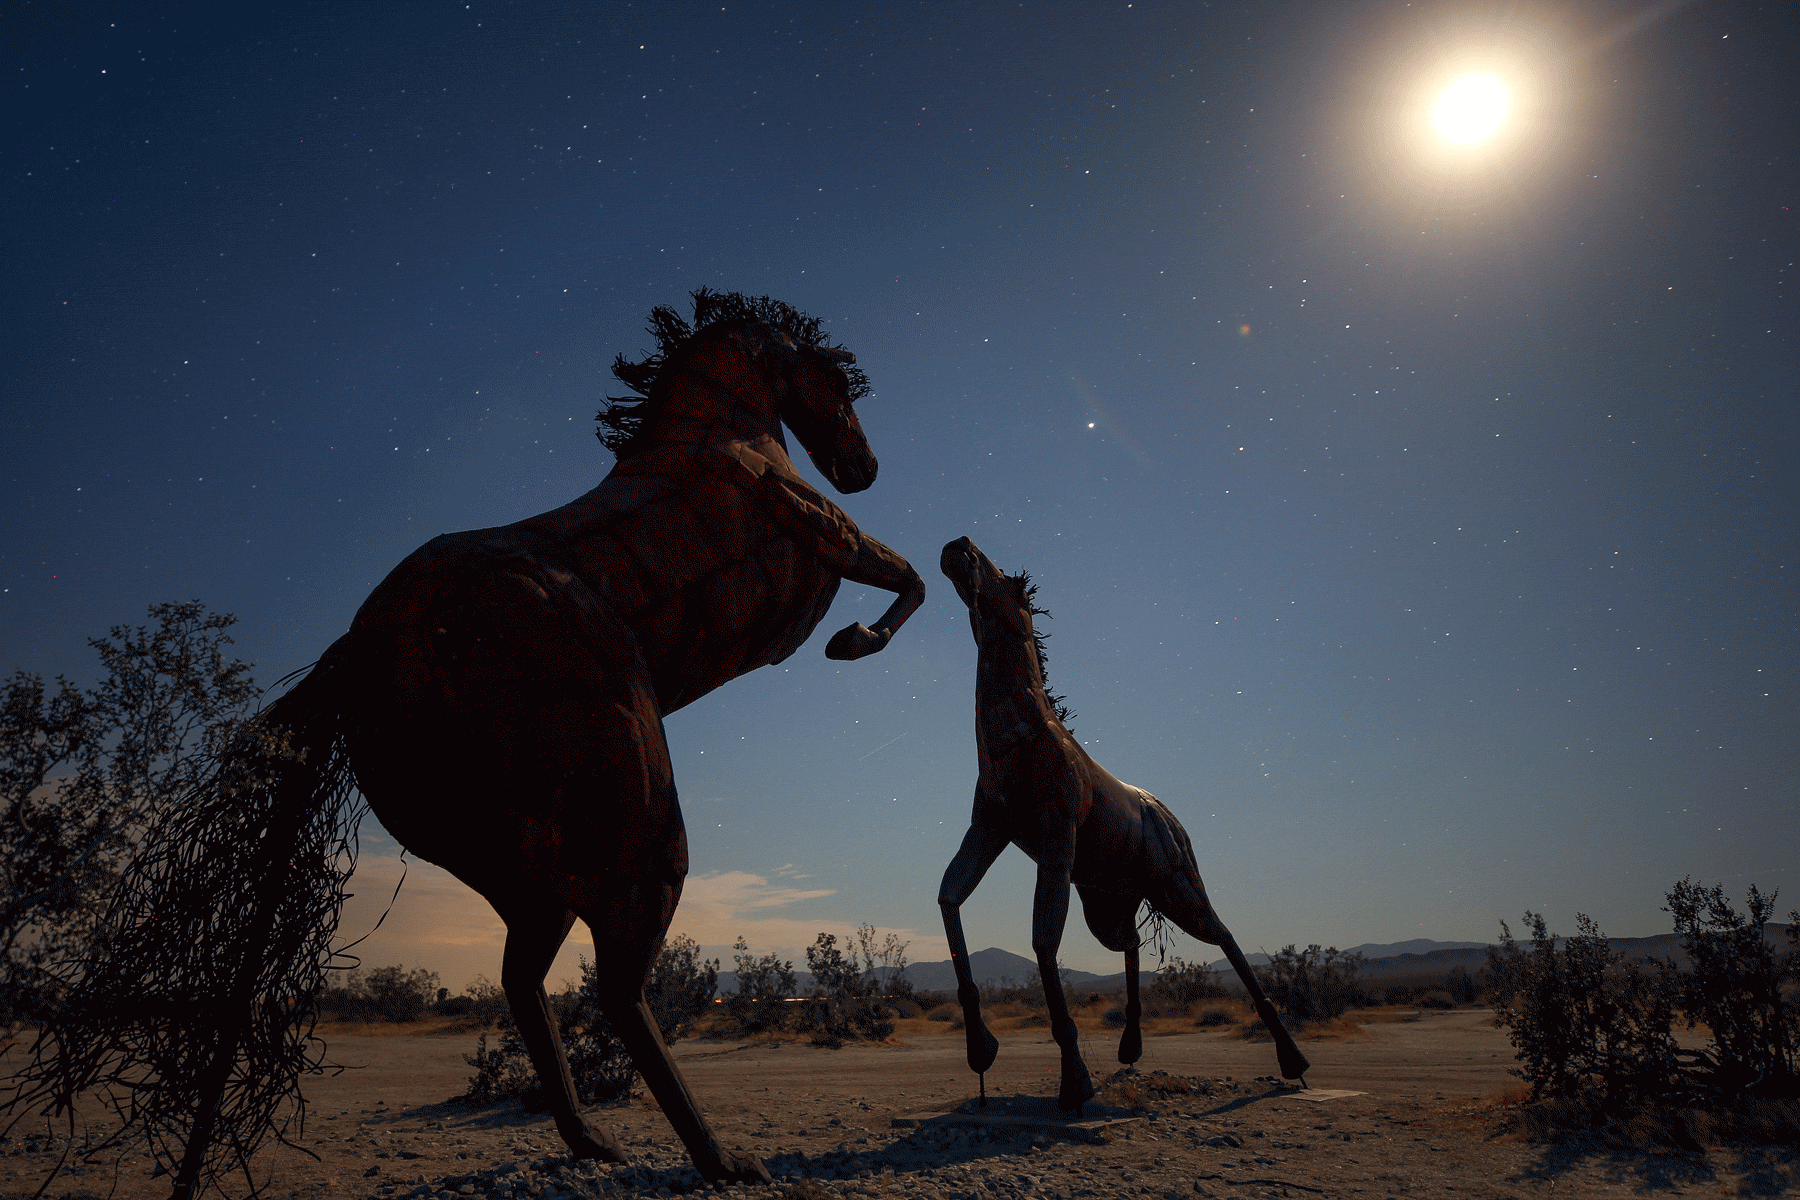 Horse sculptures are in silhouette at dusk in a desert setting.